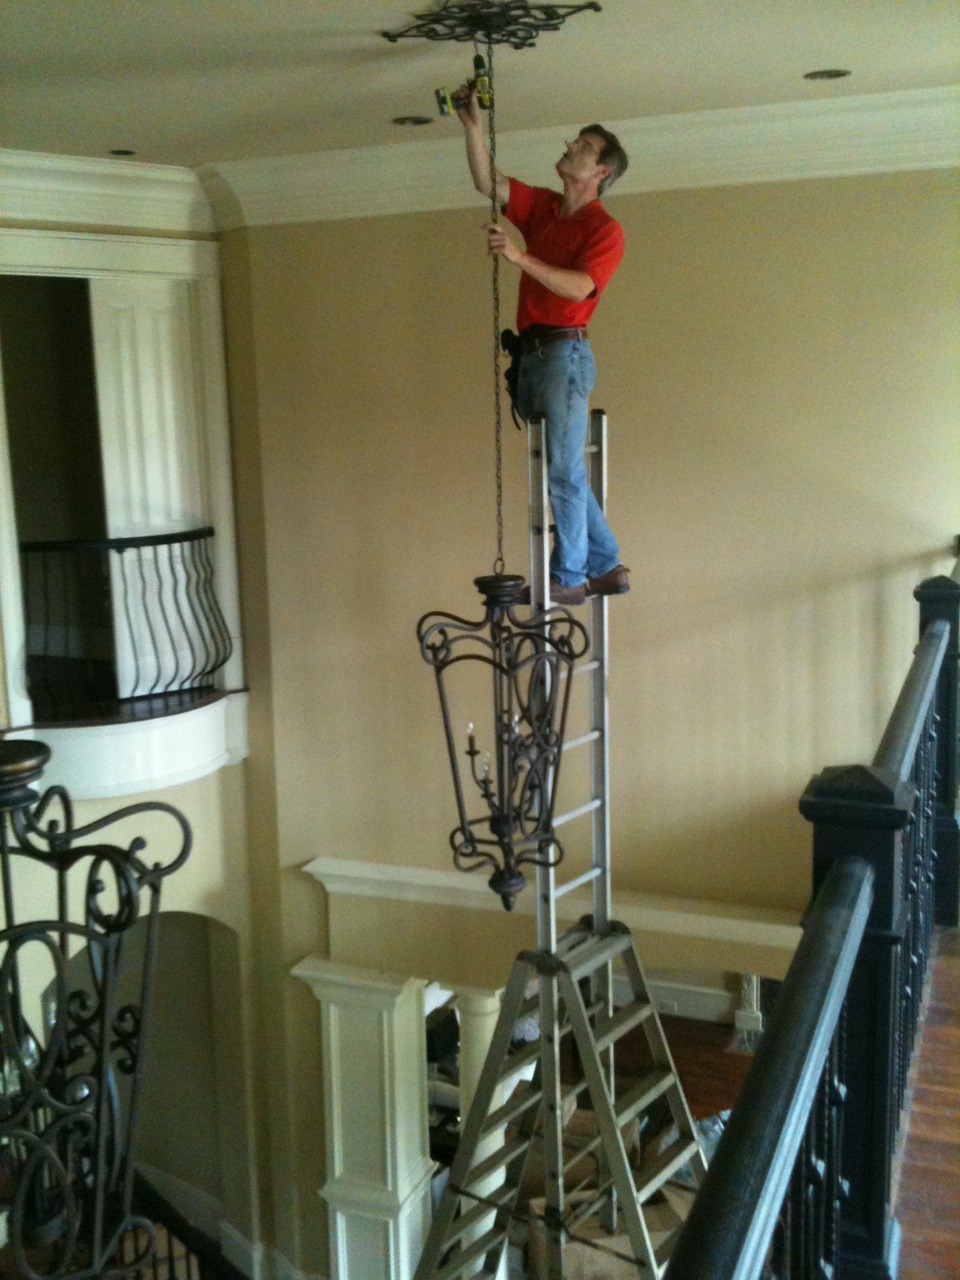 Chandelier Installation Atlanta - How To Remove A Heavy Chandelier From High Ceiling